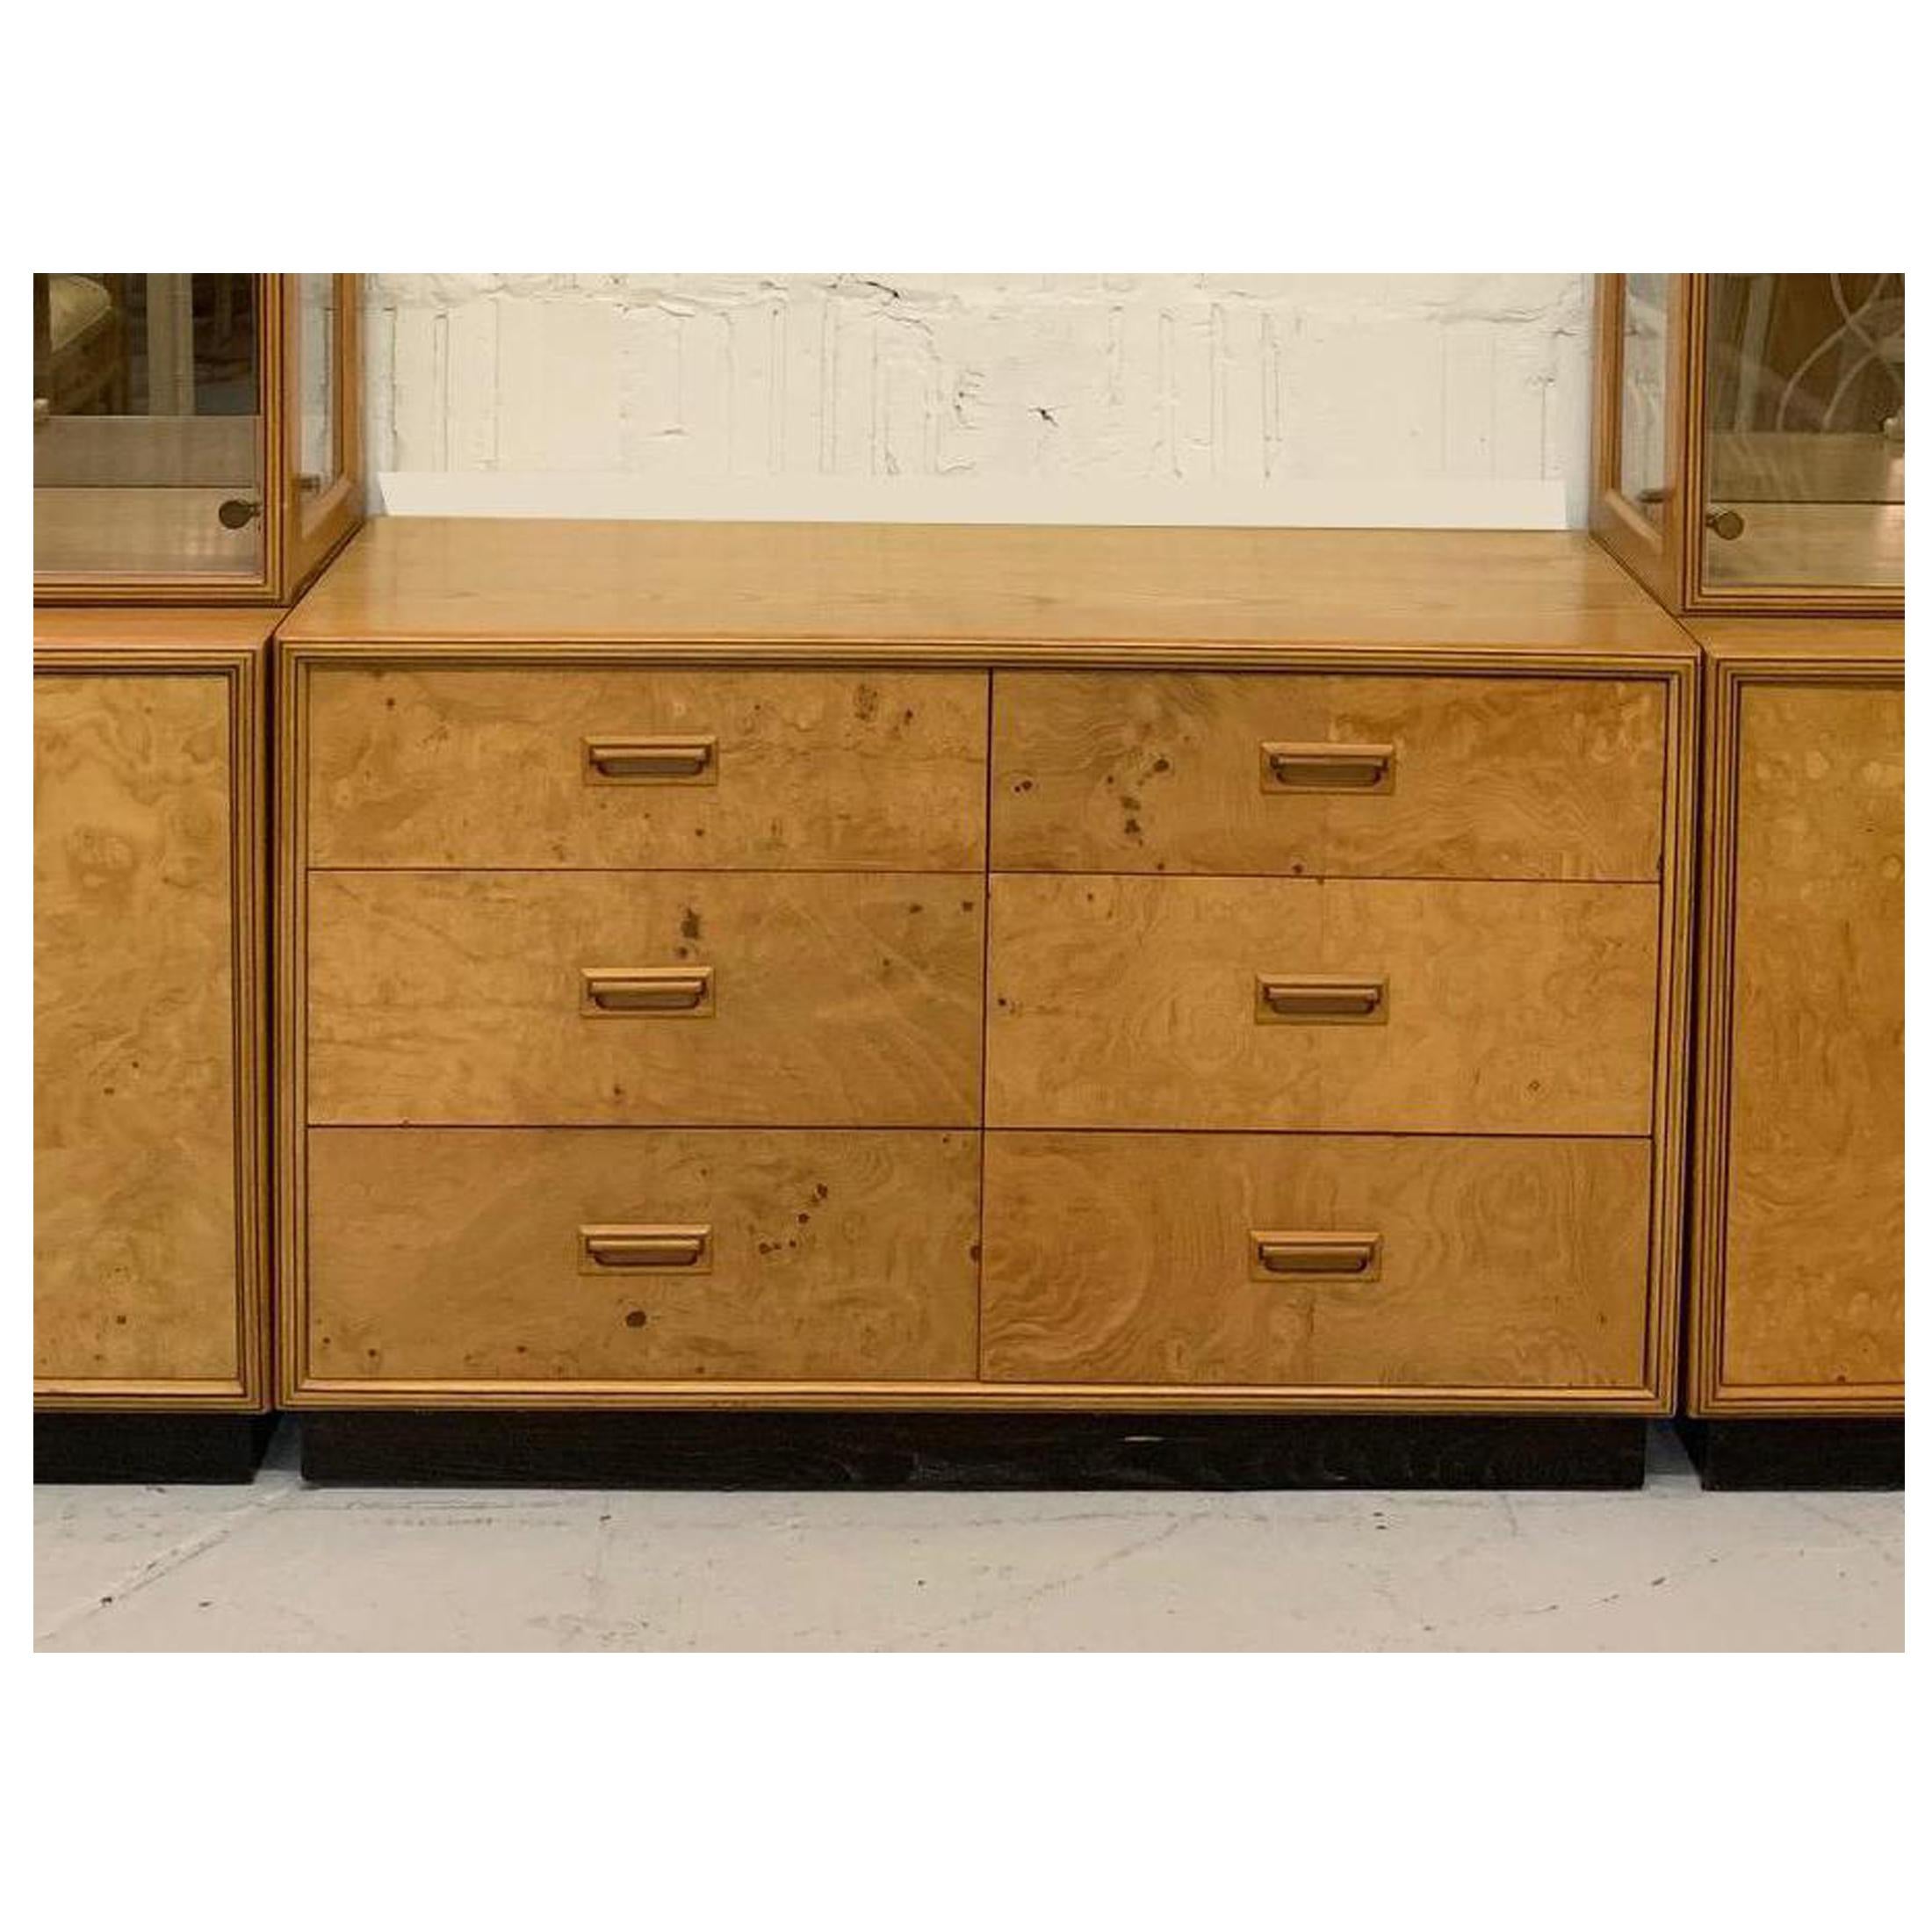 Milo Baughman style mid-century modern double dresser features patch work burl wood construction, and hand inlaid pulls. From the Henredon 